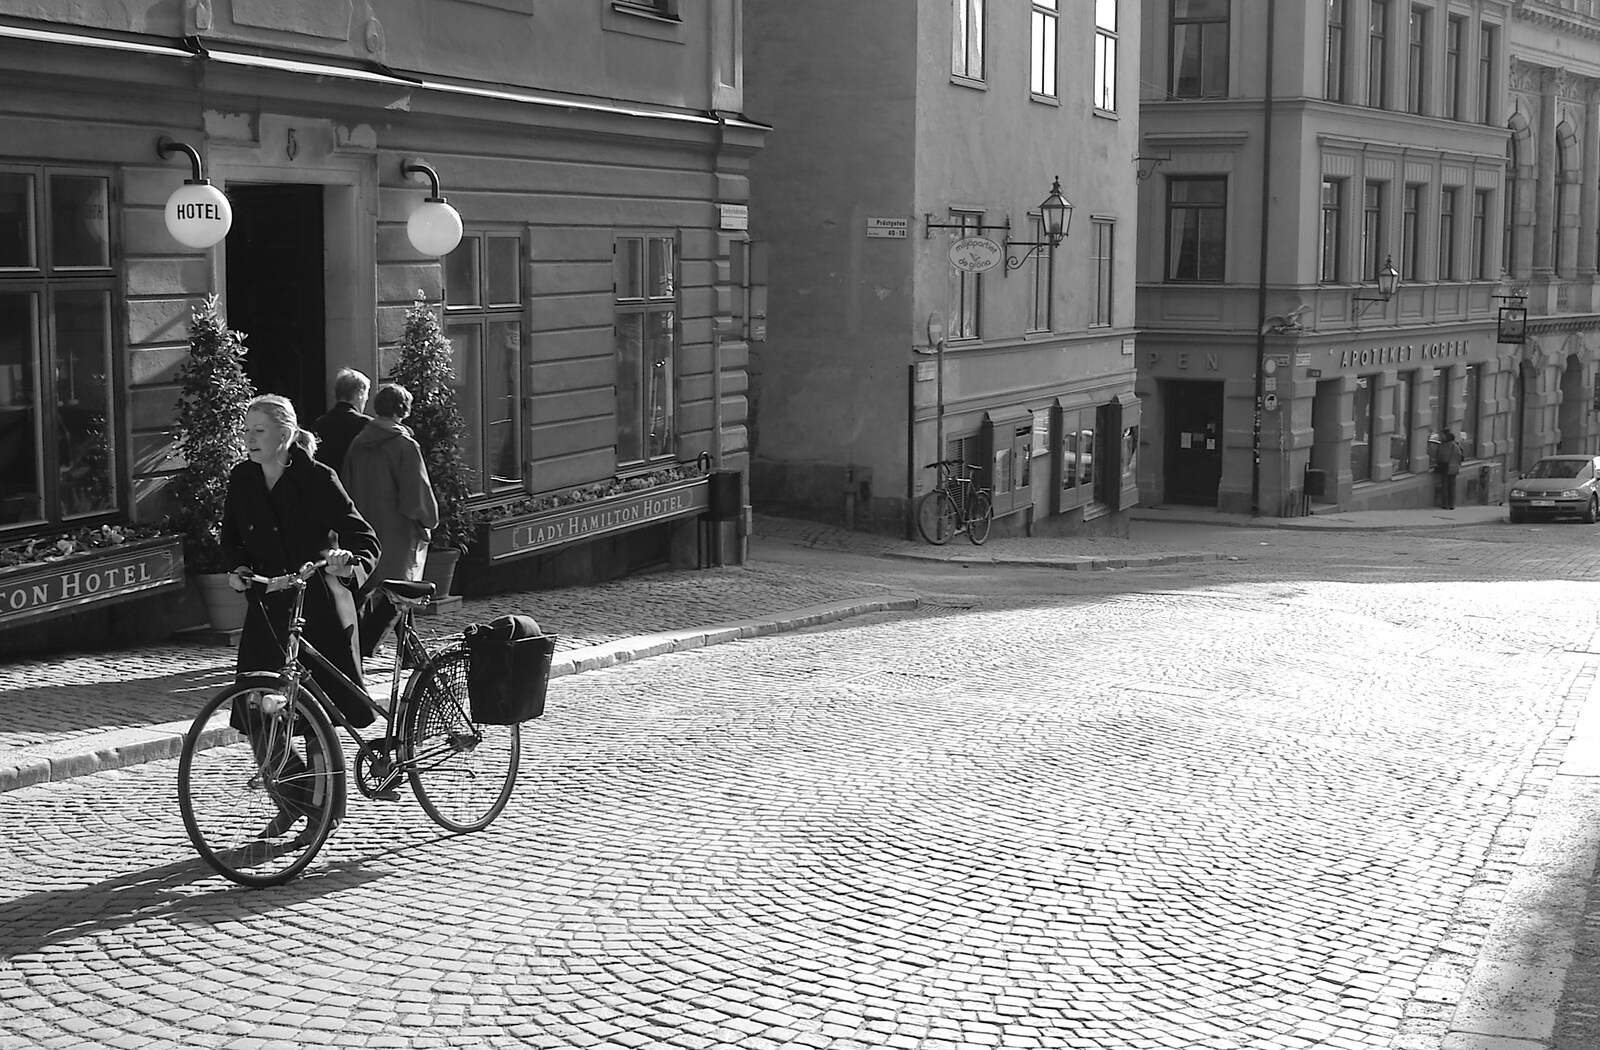 Pushing a bike uphill by the Lady Hamilton Hotel from A Postcard From Stockholm: A Working Trip to Sweden - 24th April 2005